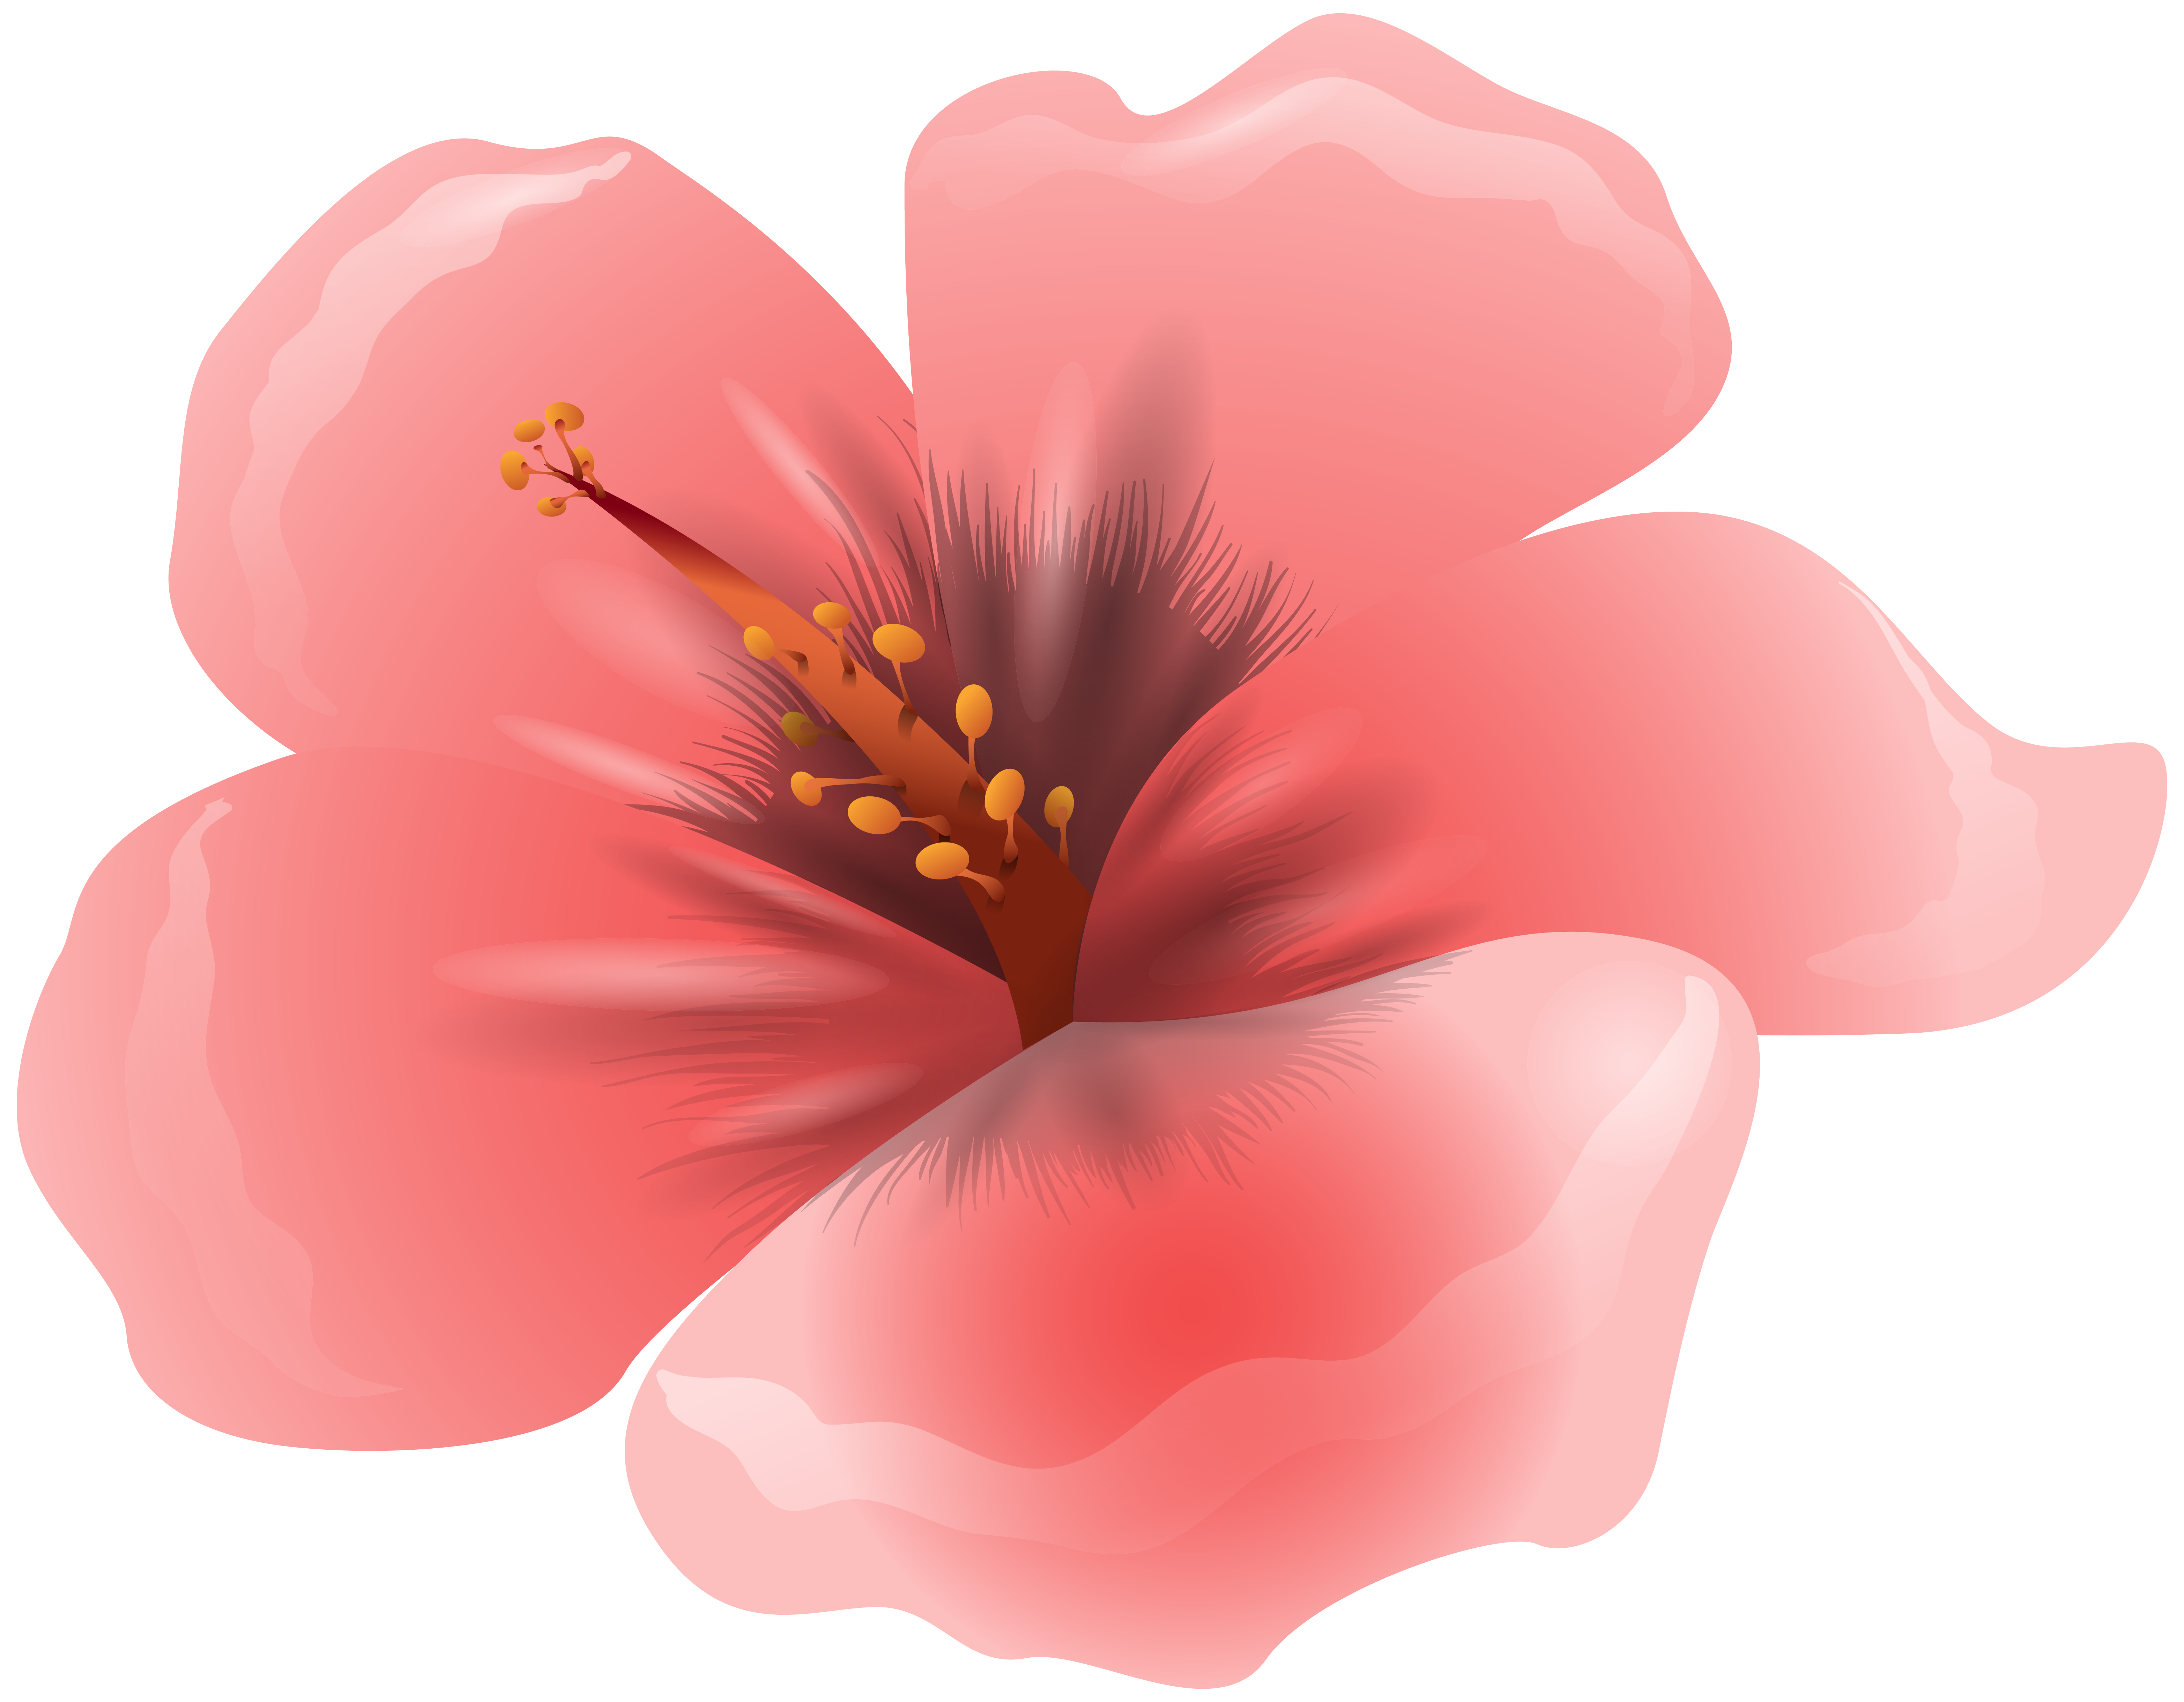 Large Pink Flower Clipart PNG Image | Gallery Yopriceville - High ...